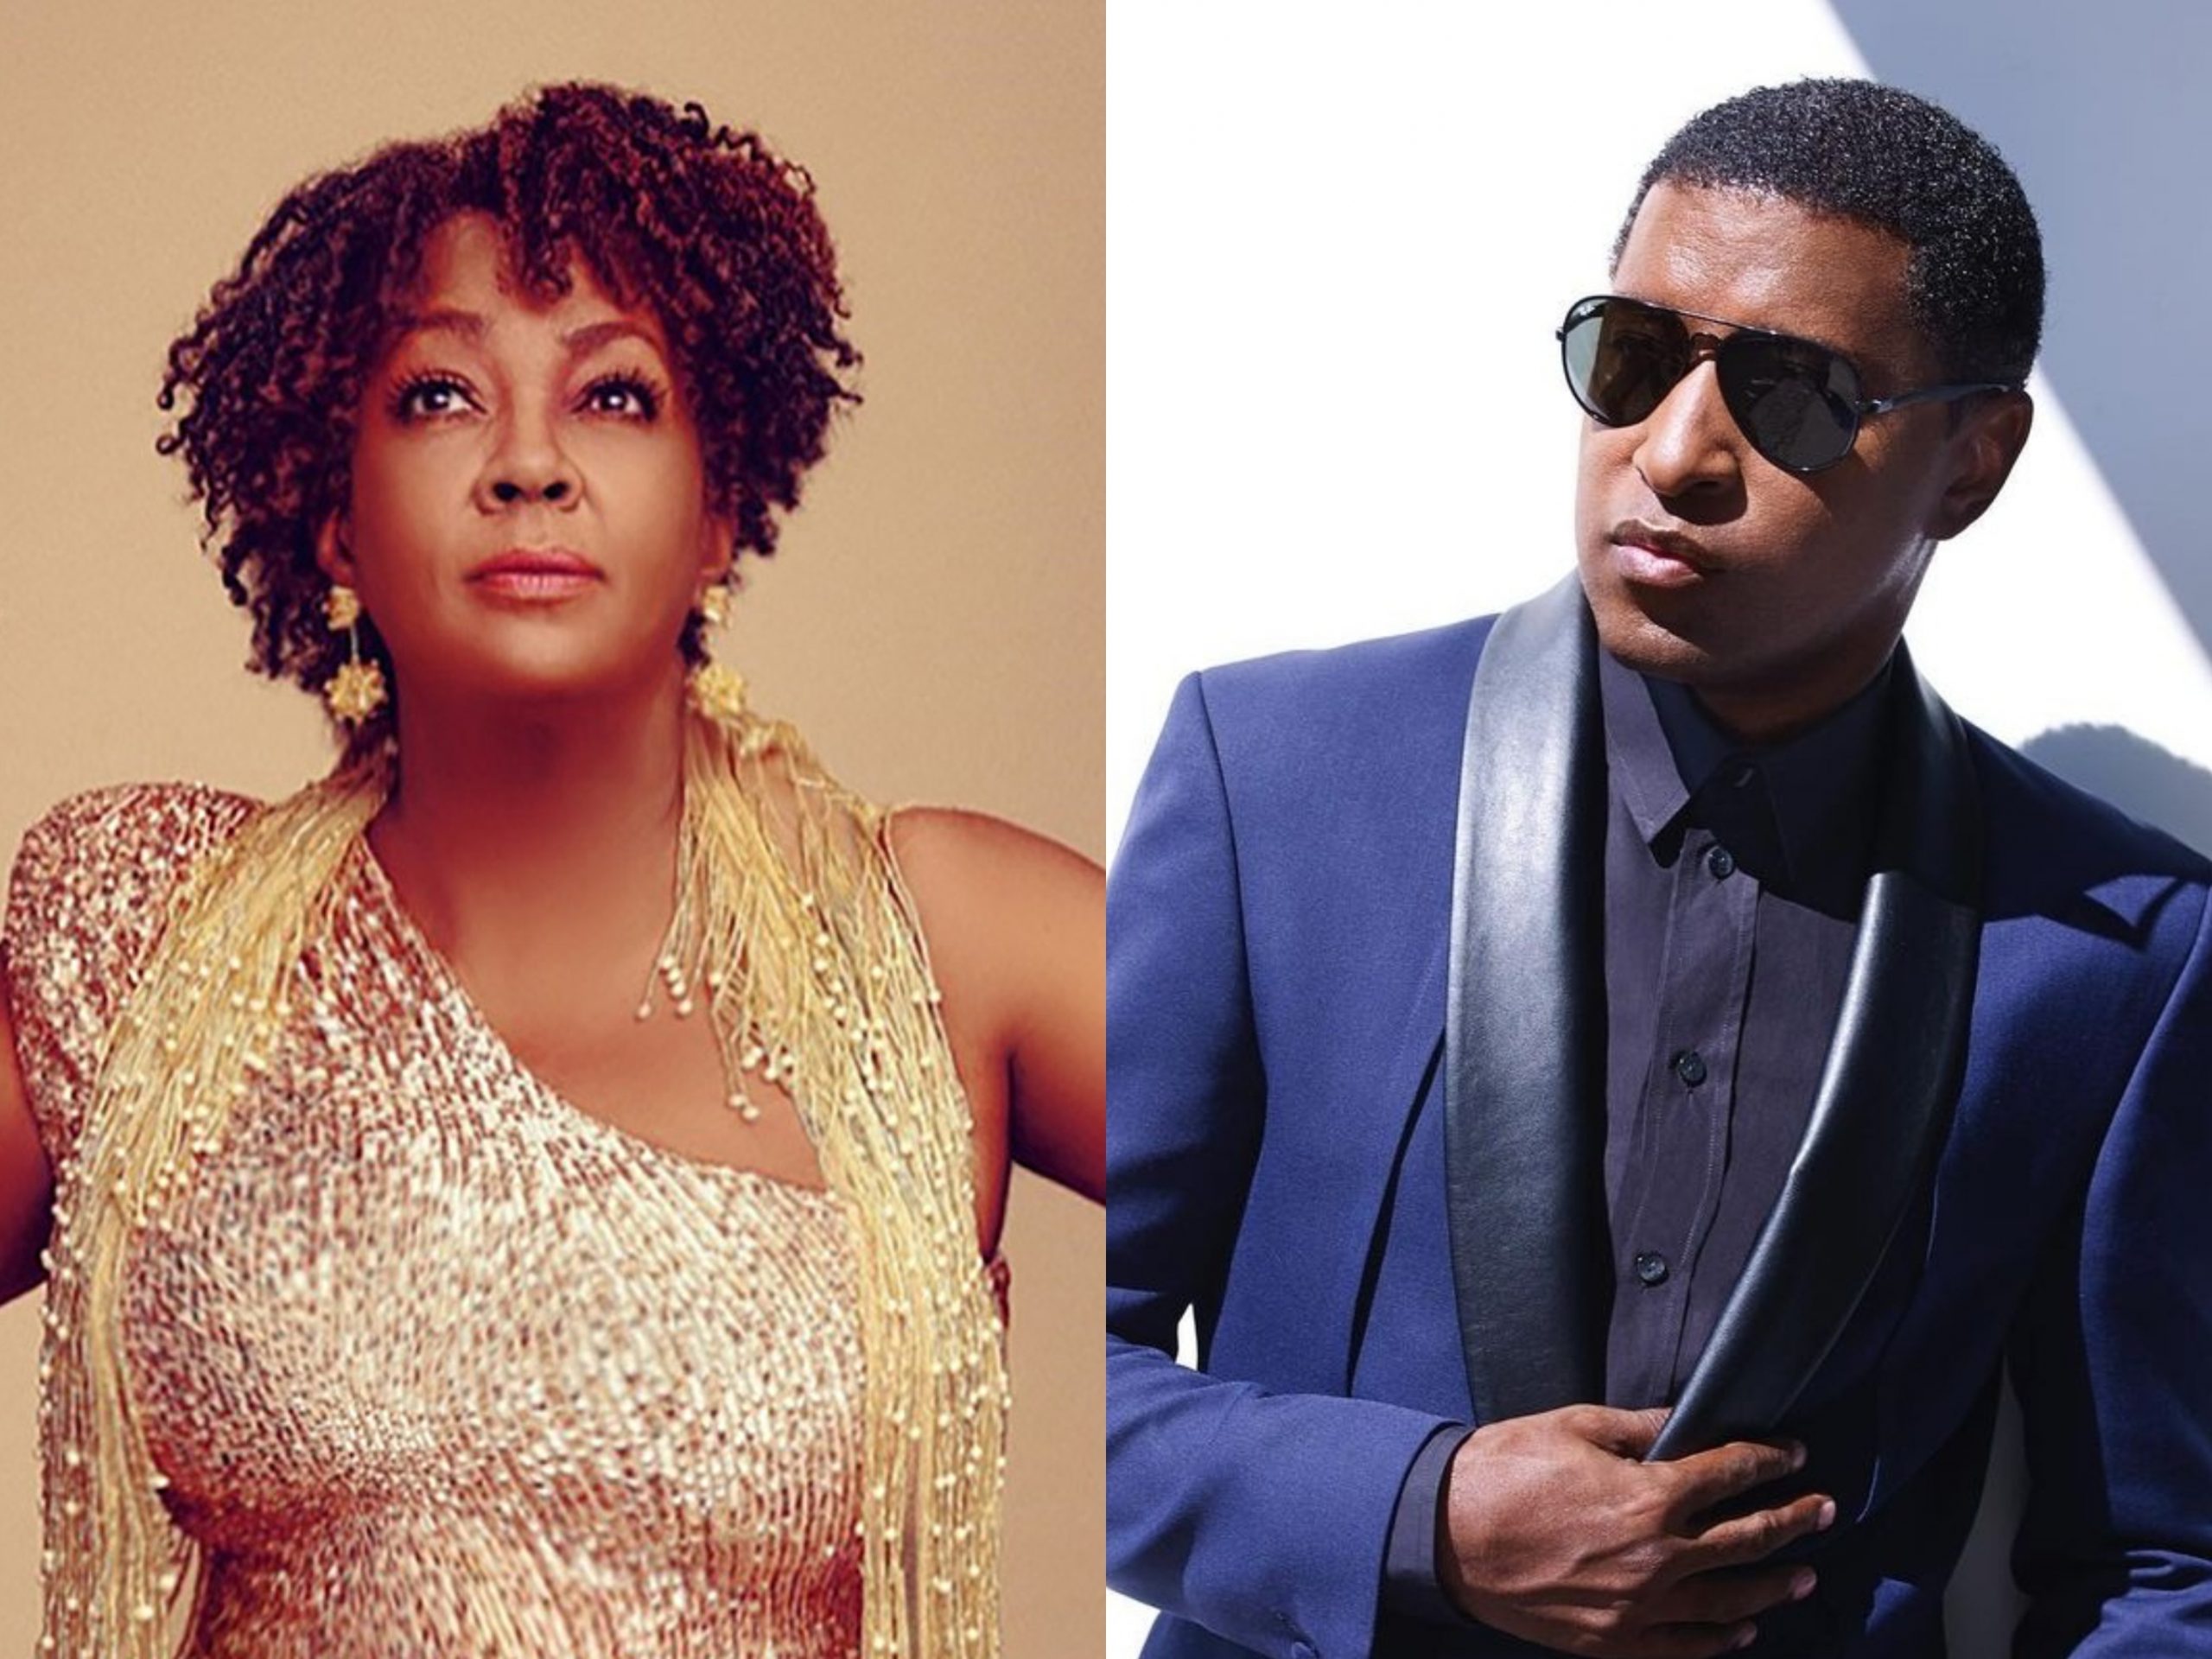 Anita Baker Drops Babyface From Tour After Claims of Cyberbullying From His Fans